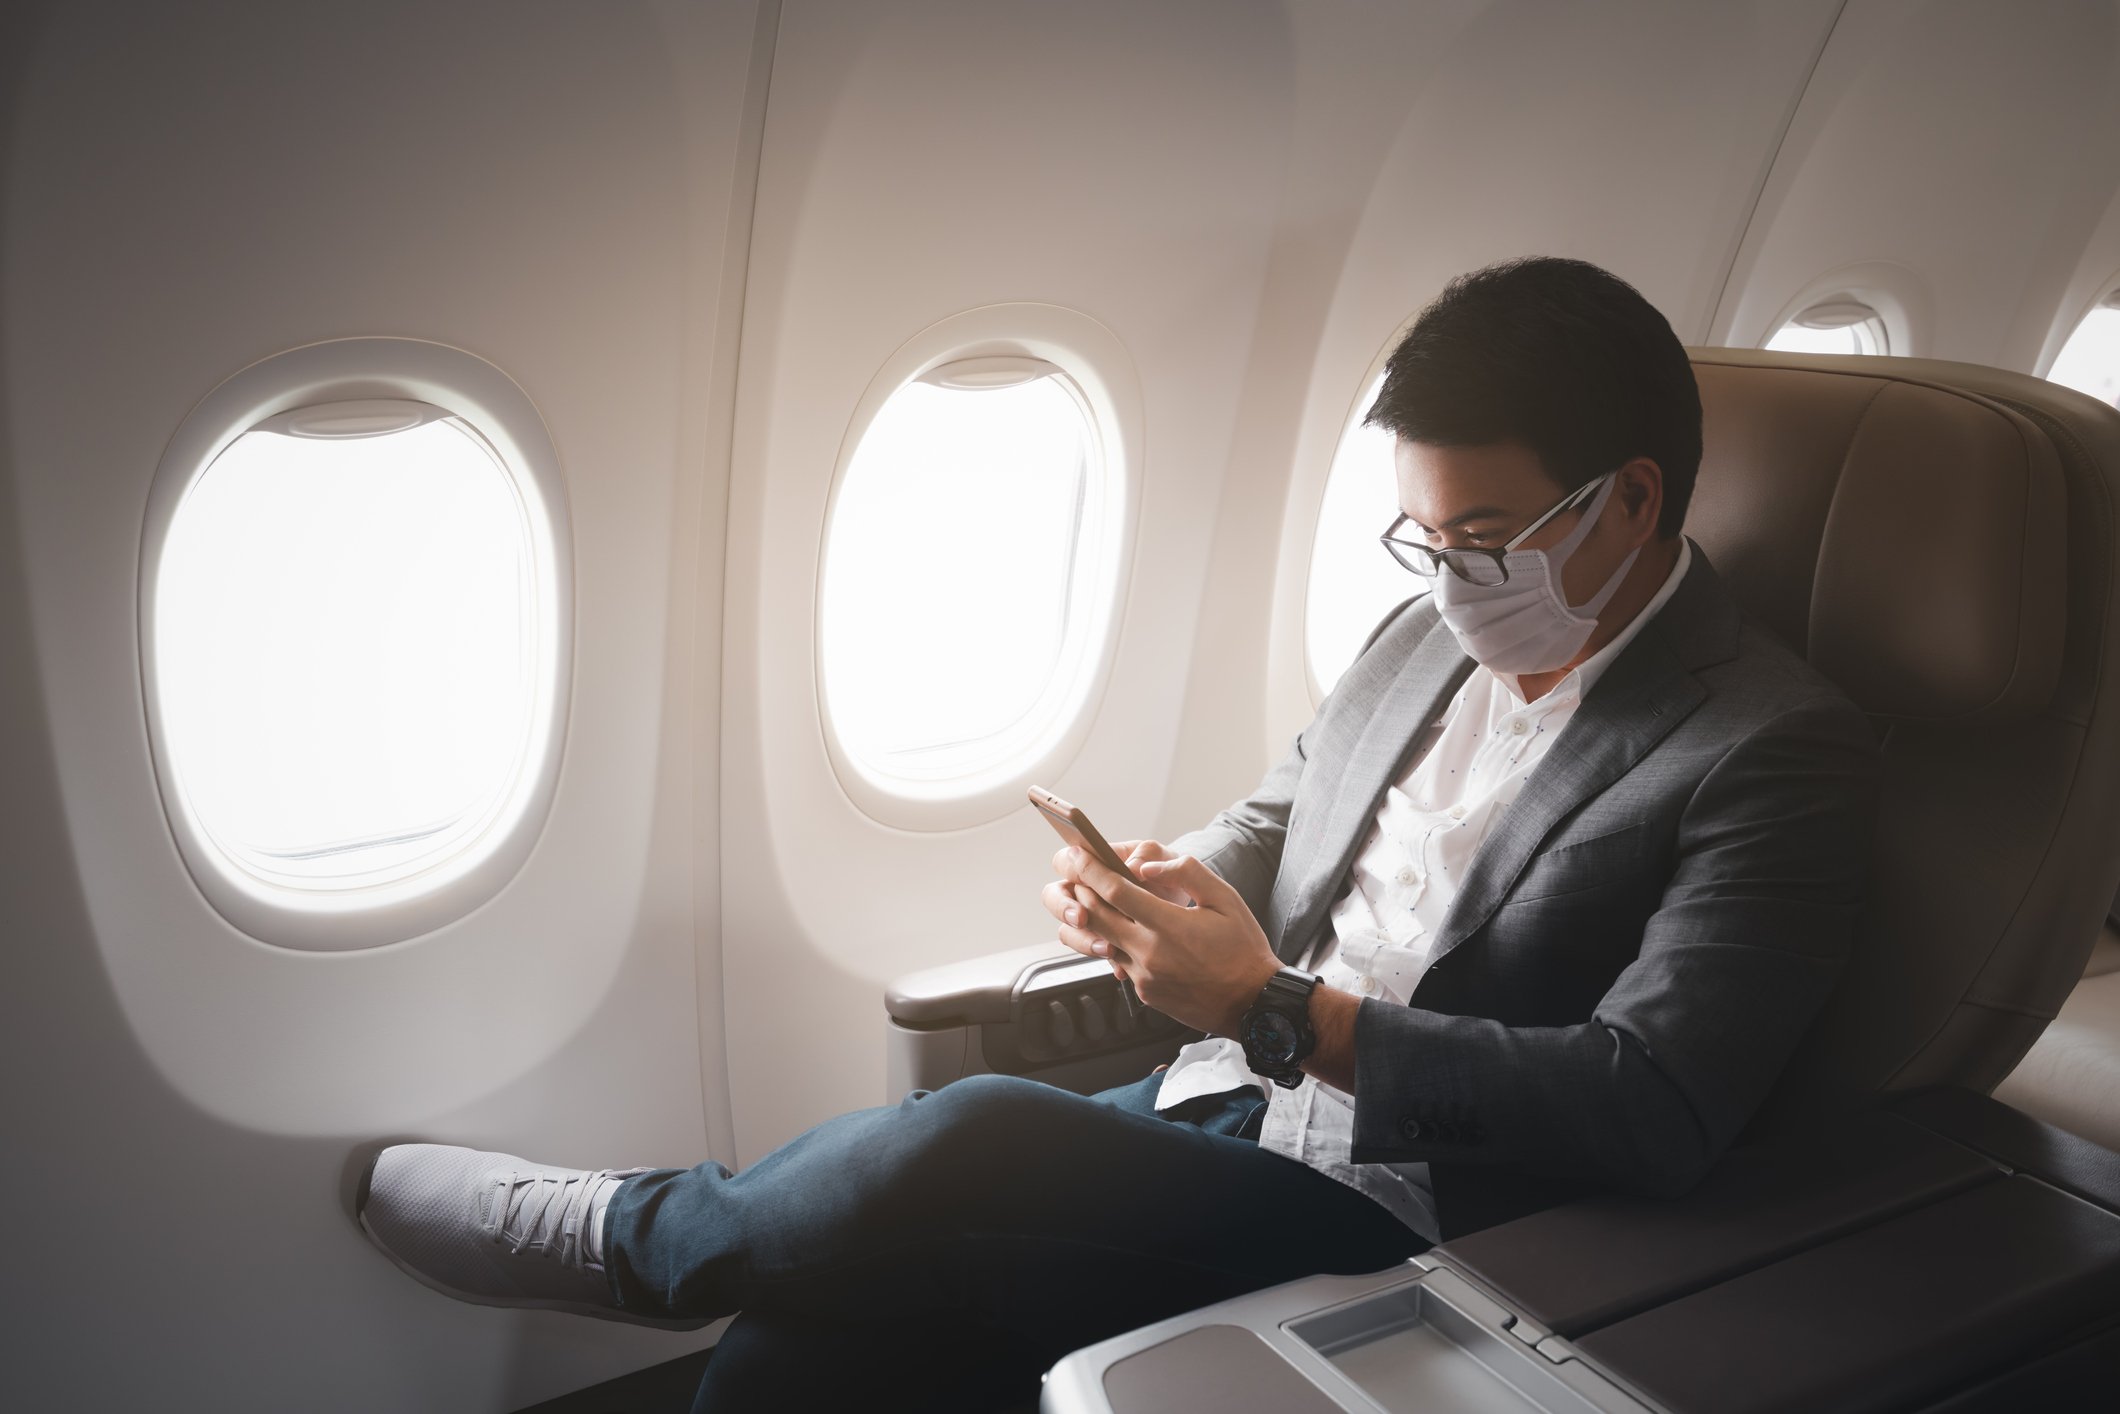 Young business man sits on the plane with his face mask on while using his smartphone. | Photo: Getty Images